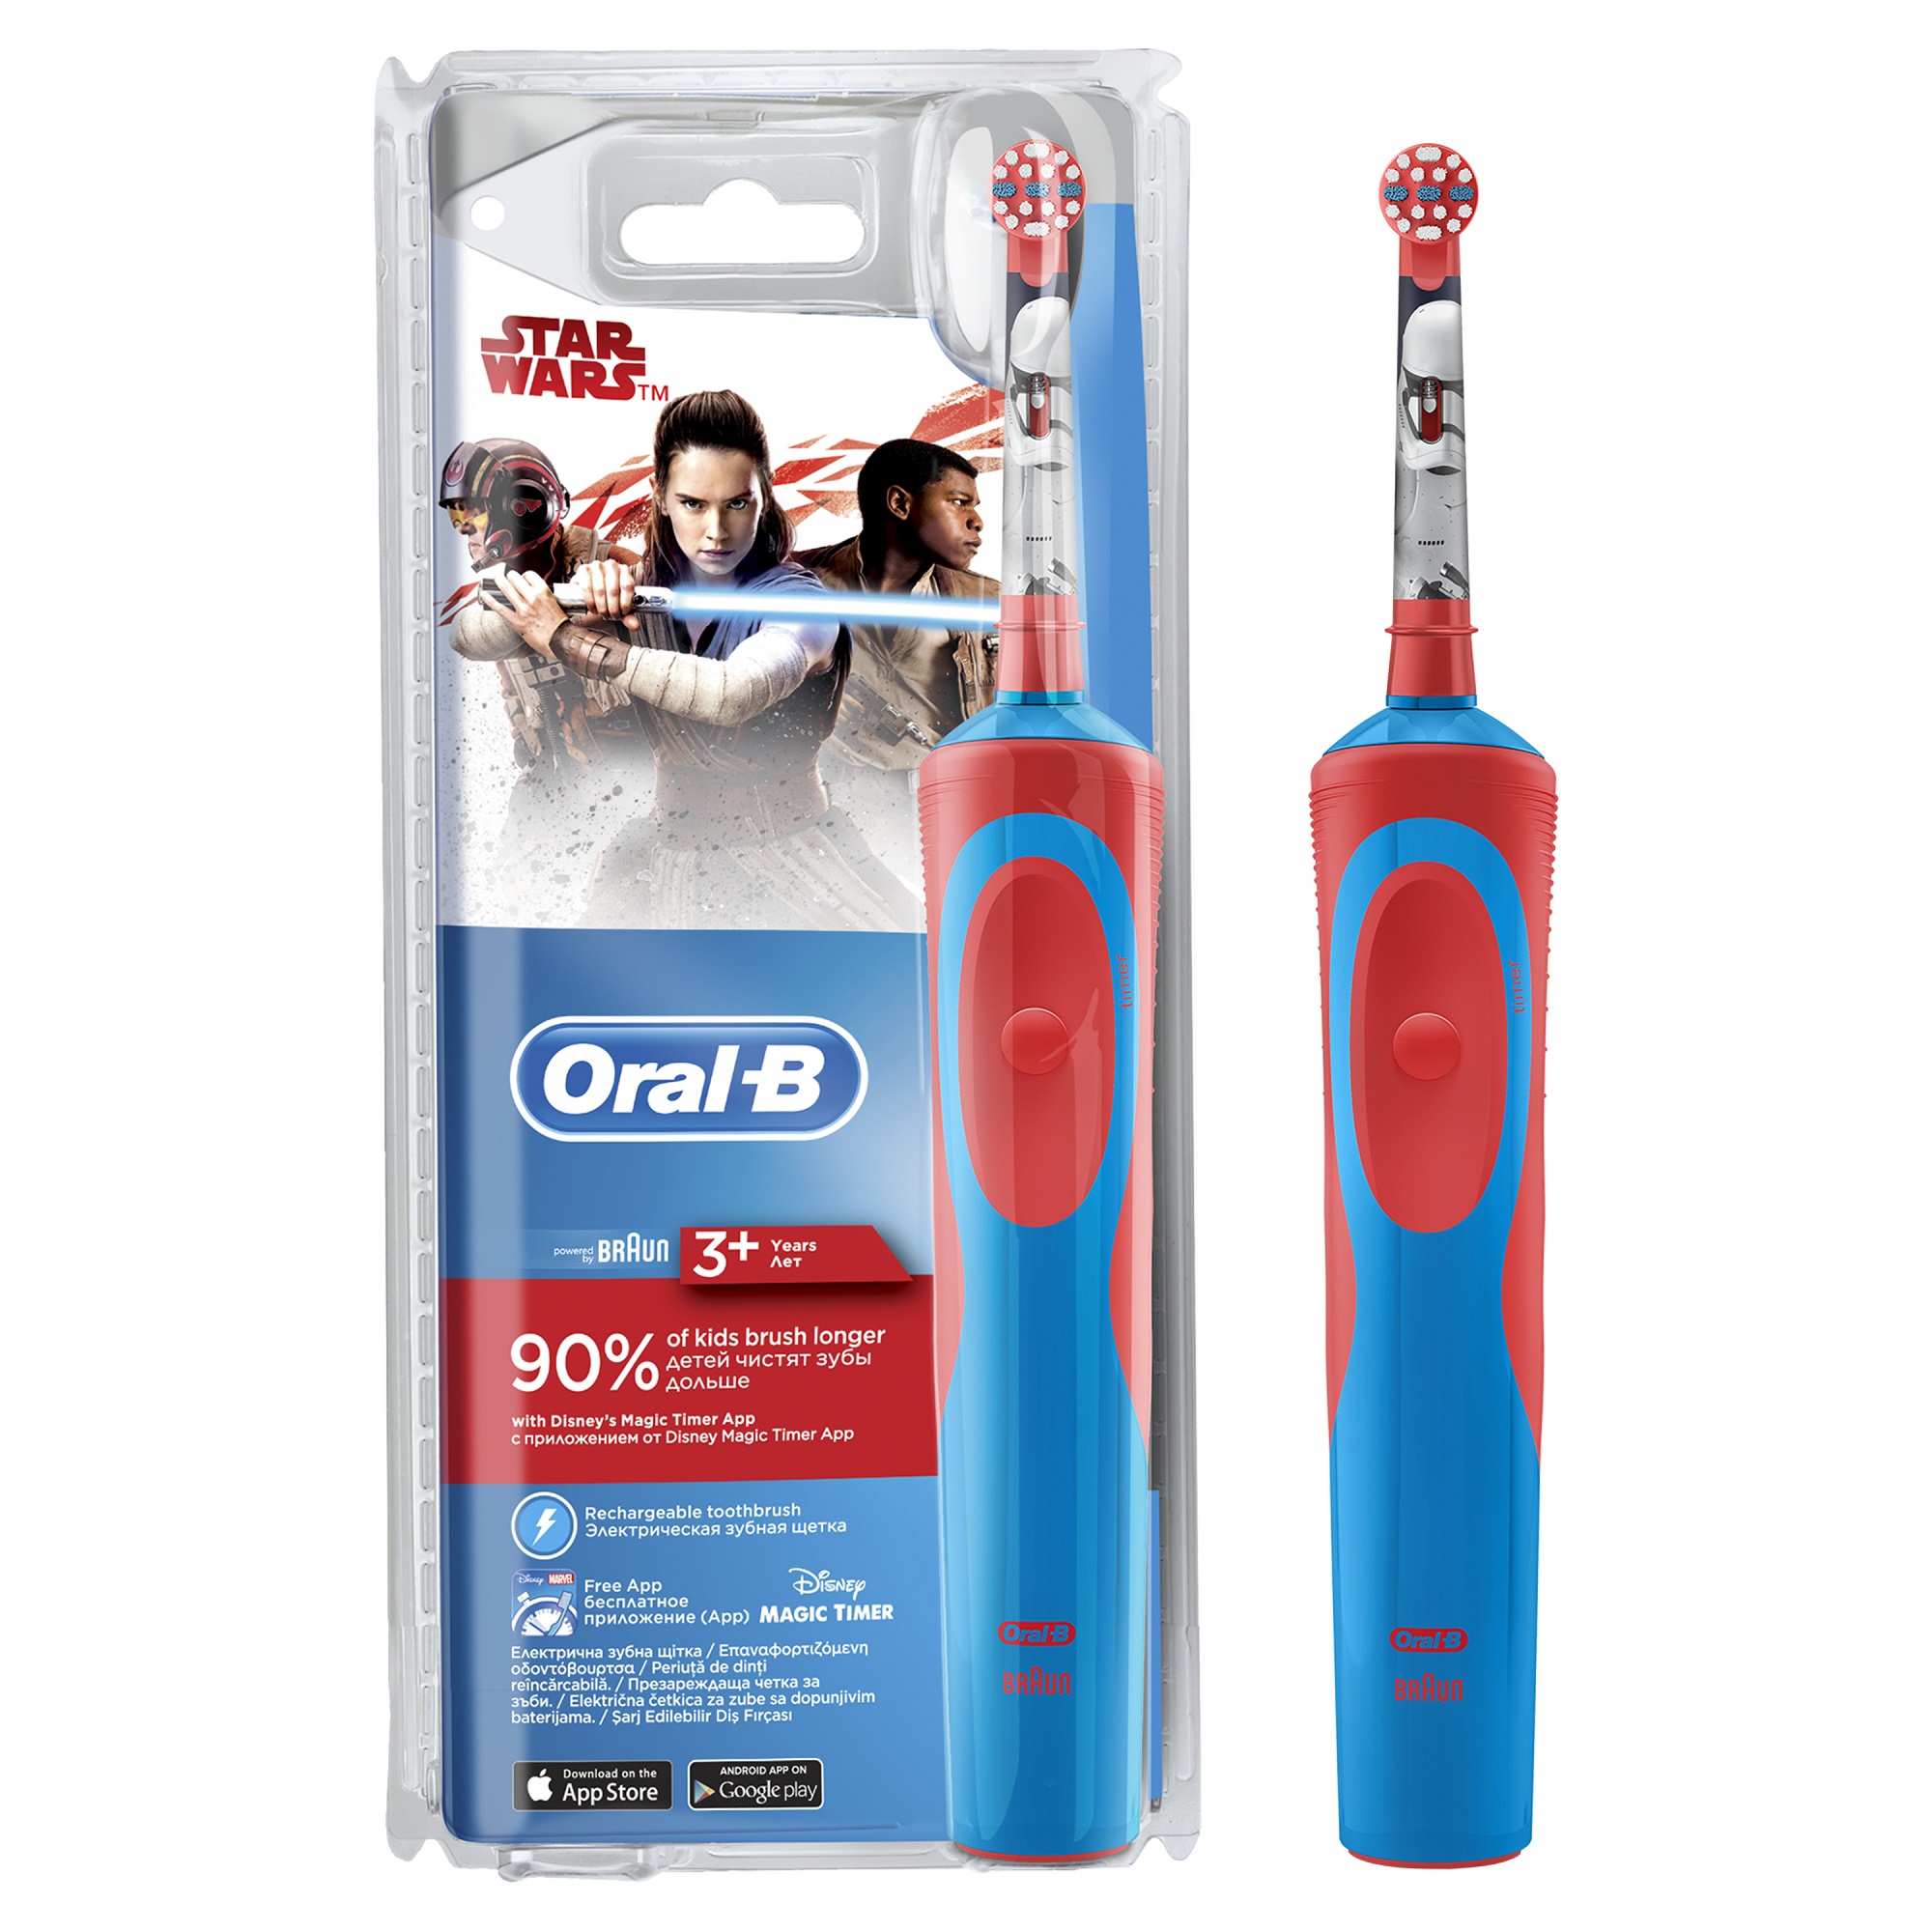 Oral-B Kids Electric Toothbrush Featuring Star Wars Anniversary 